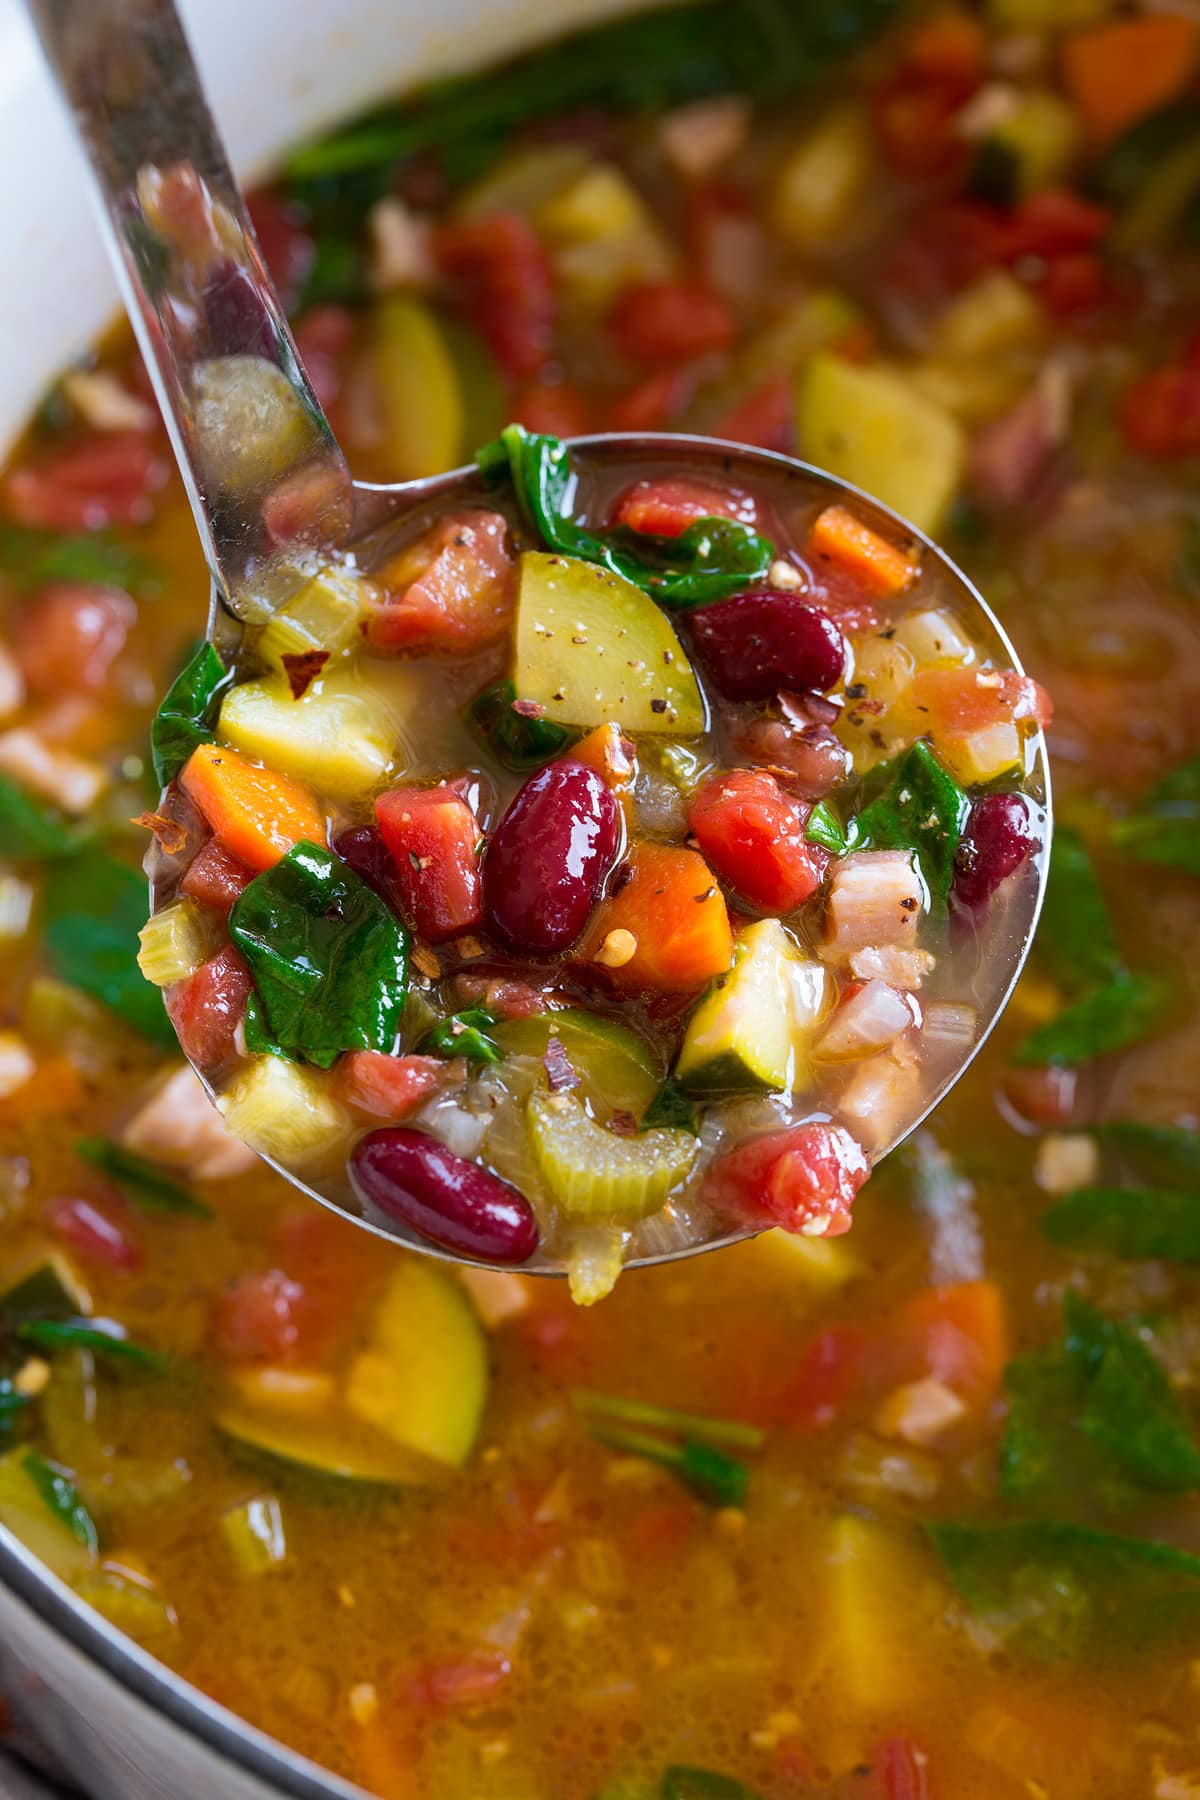 Image of ladle filled with minestrone soup shown close up.